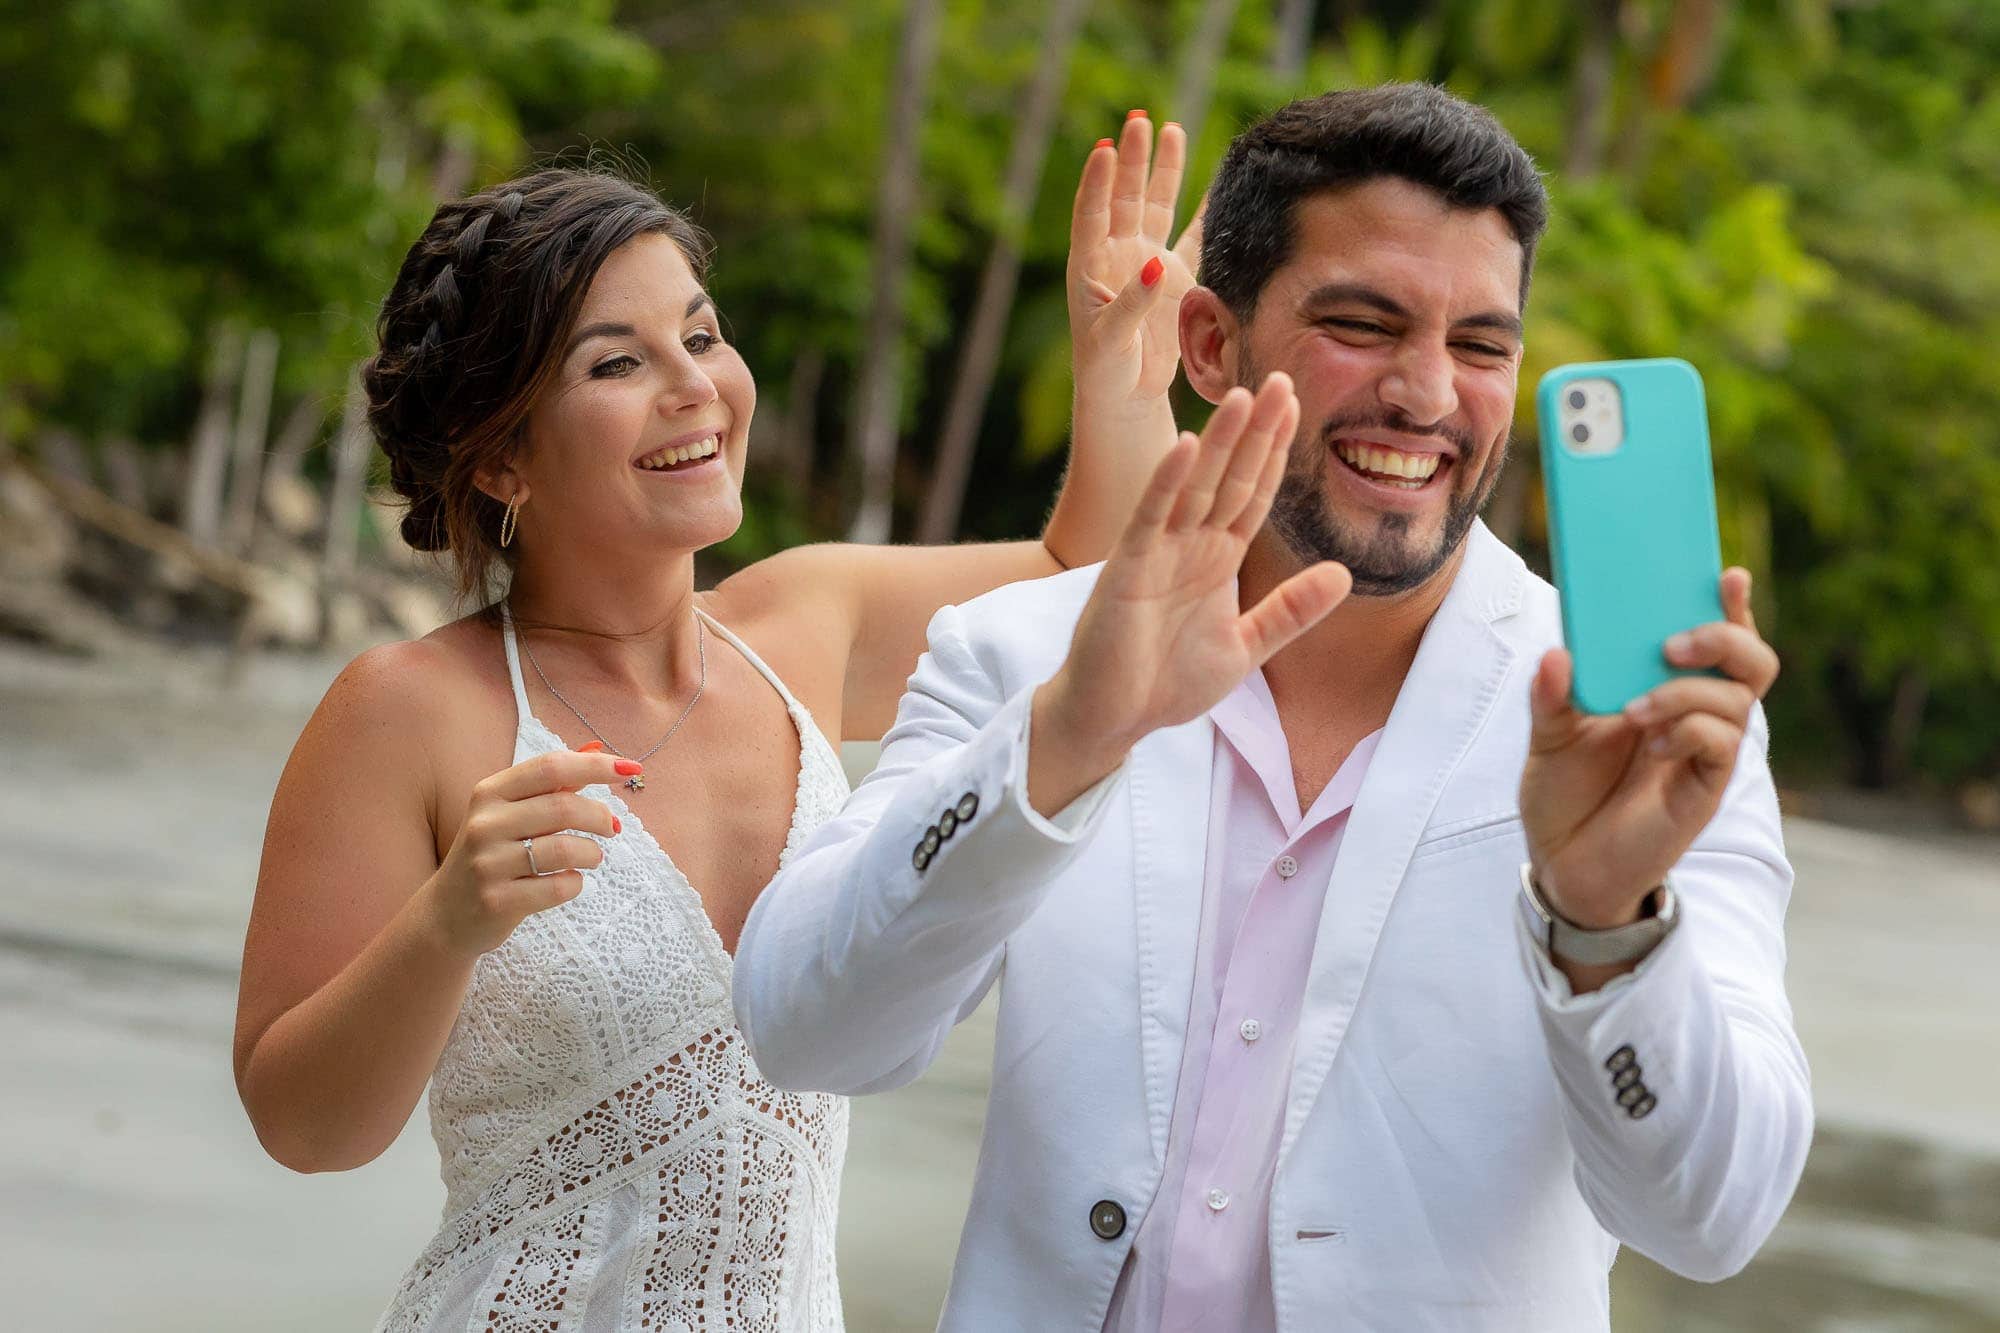 Bride and groom laughing at a cell phone